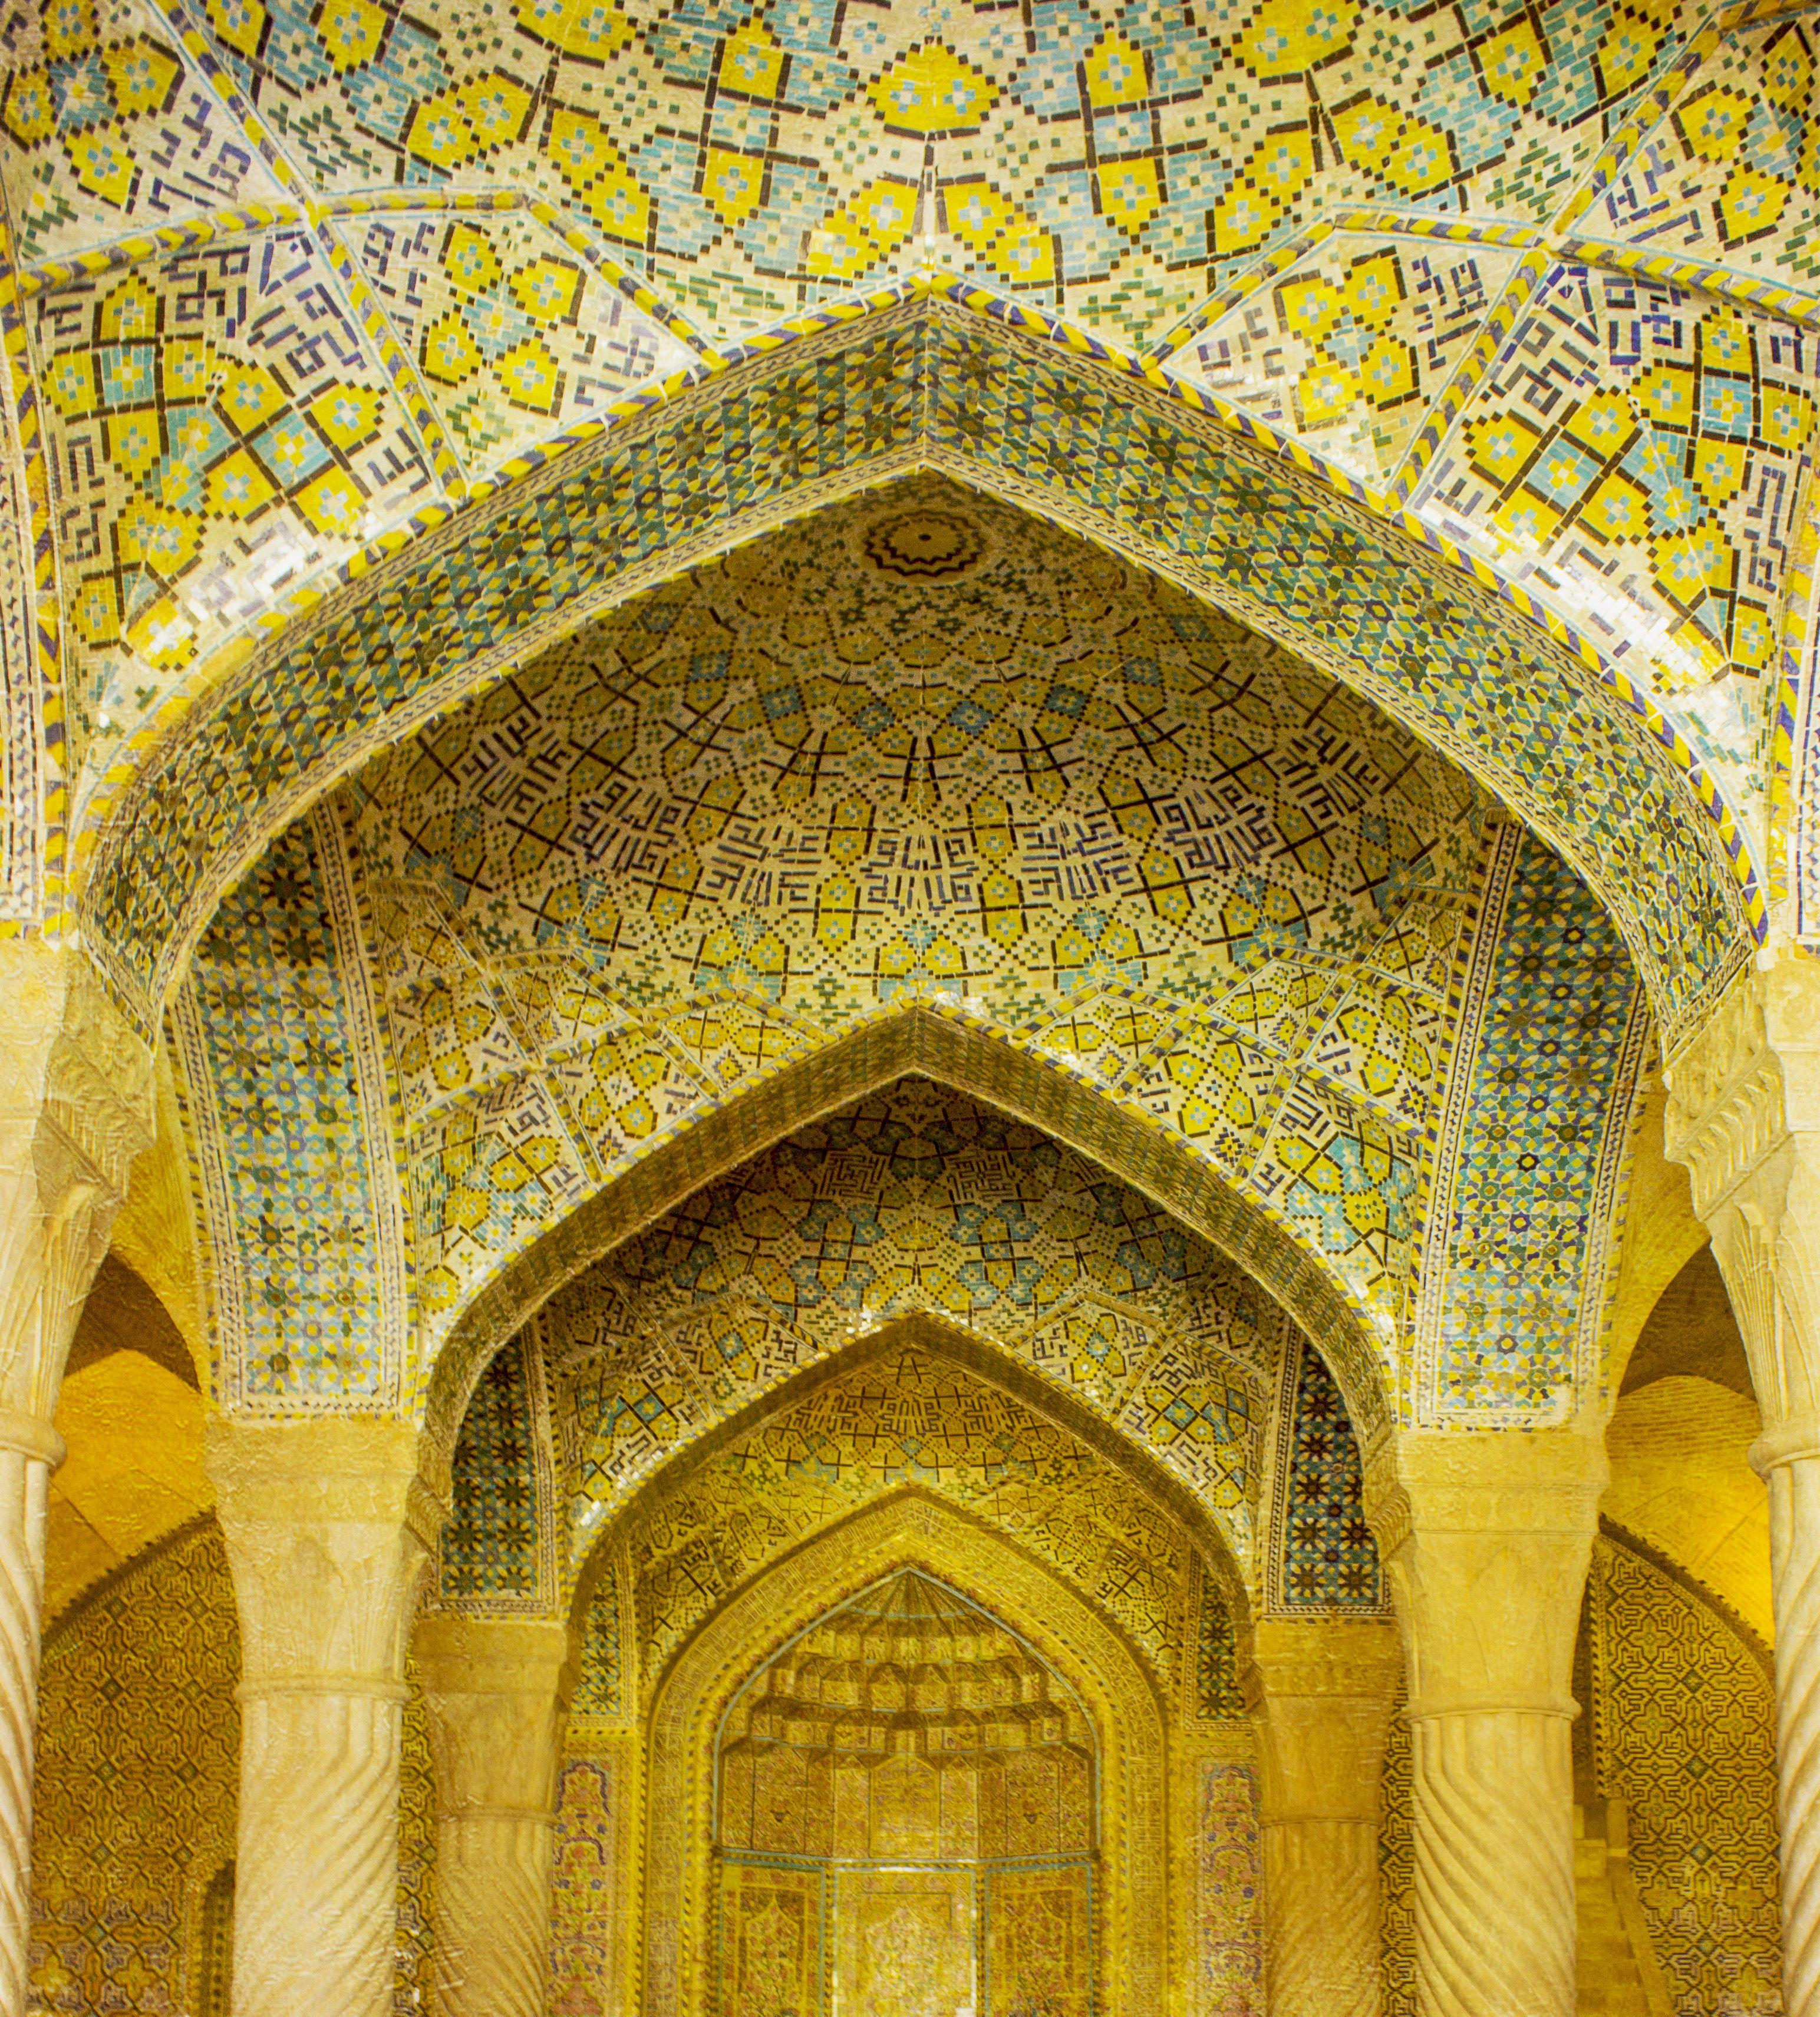 Viet Ha Tran Color Photograph - Yellow arch in Iran, Photograph, C-Type